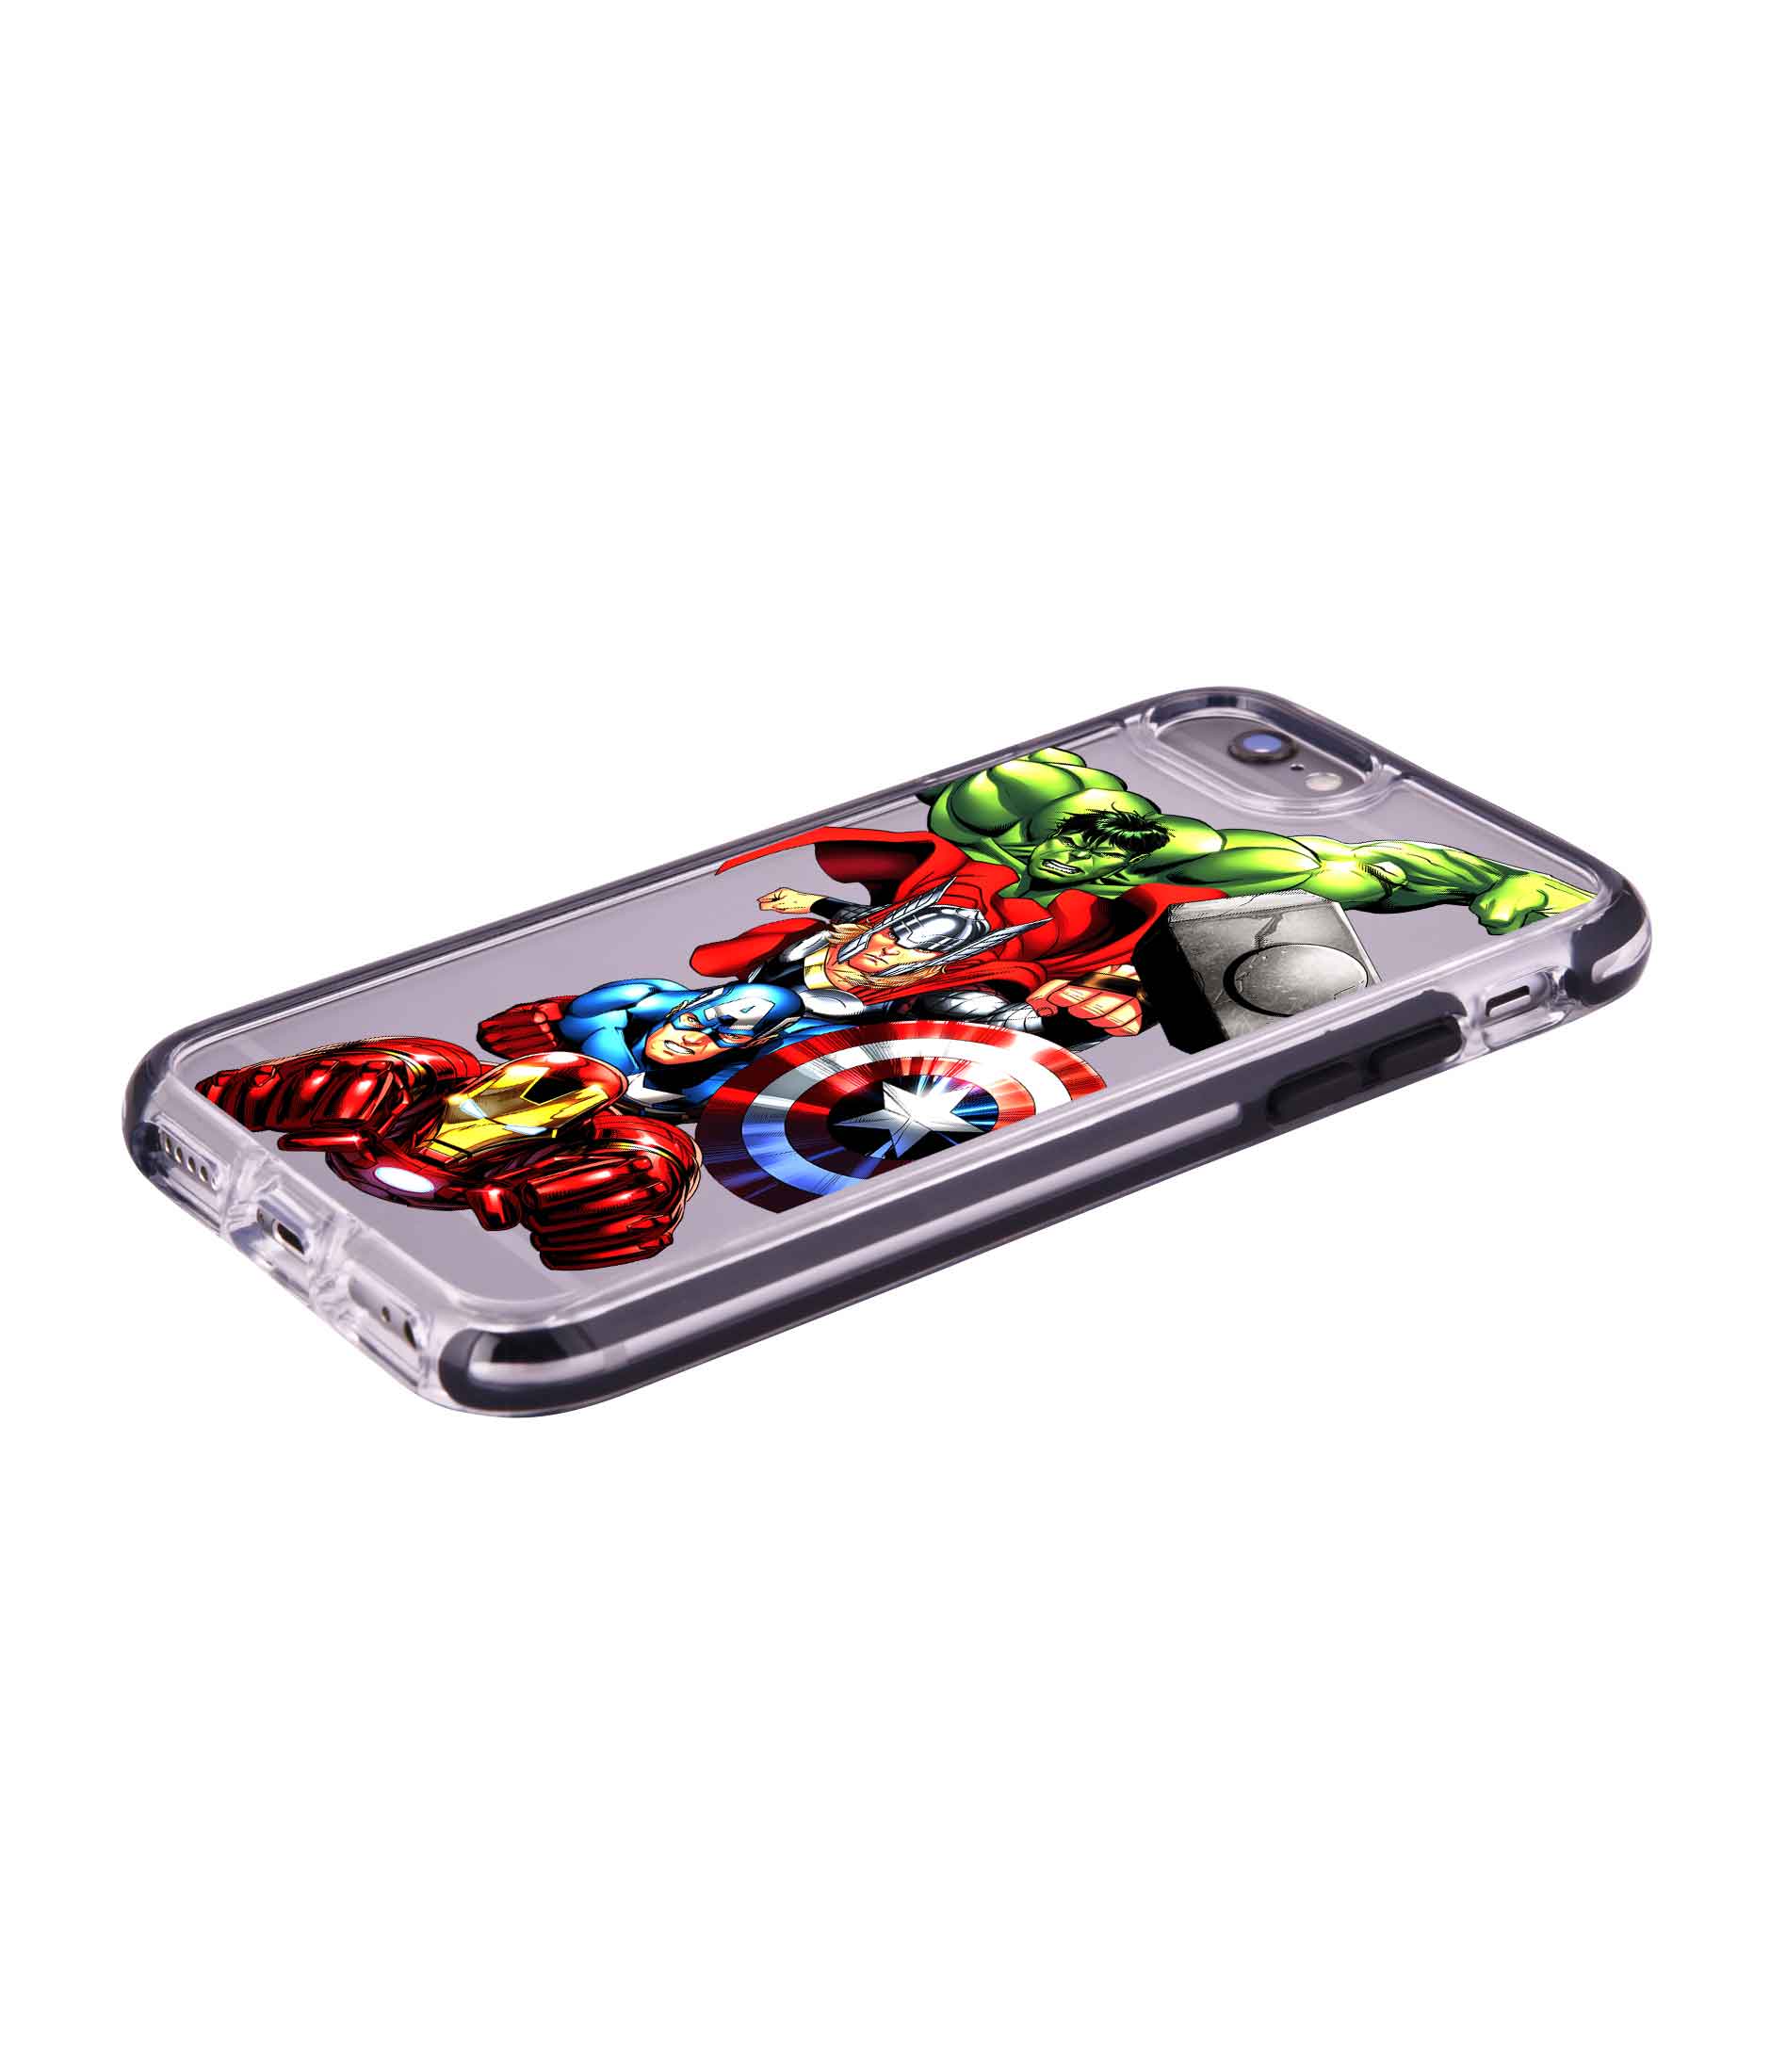 Avengers Fury - Extreme Phone Case for iPhone 6